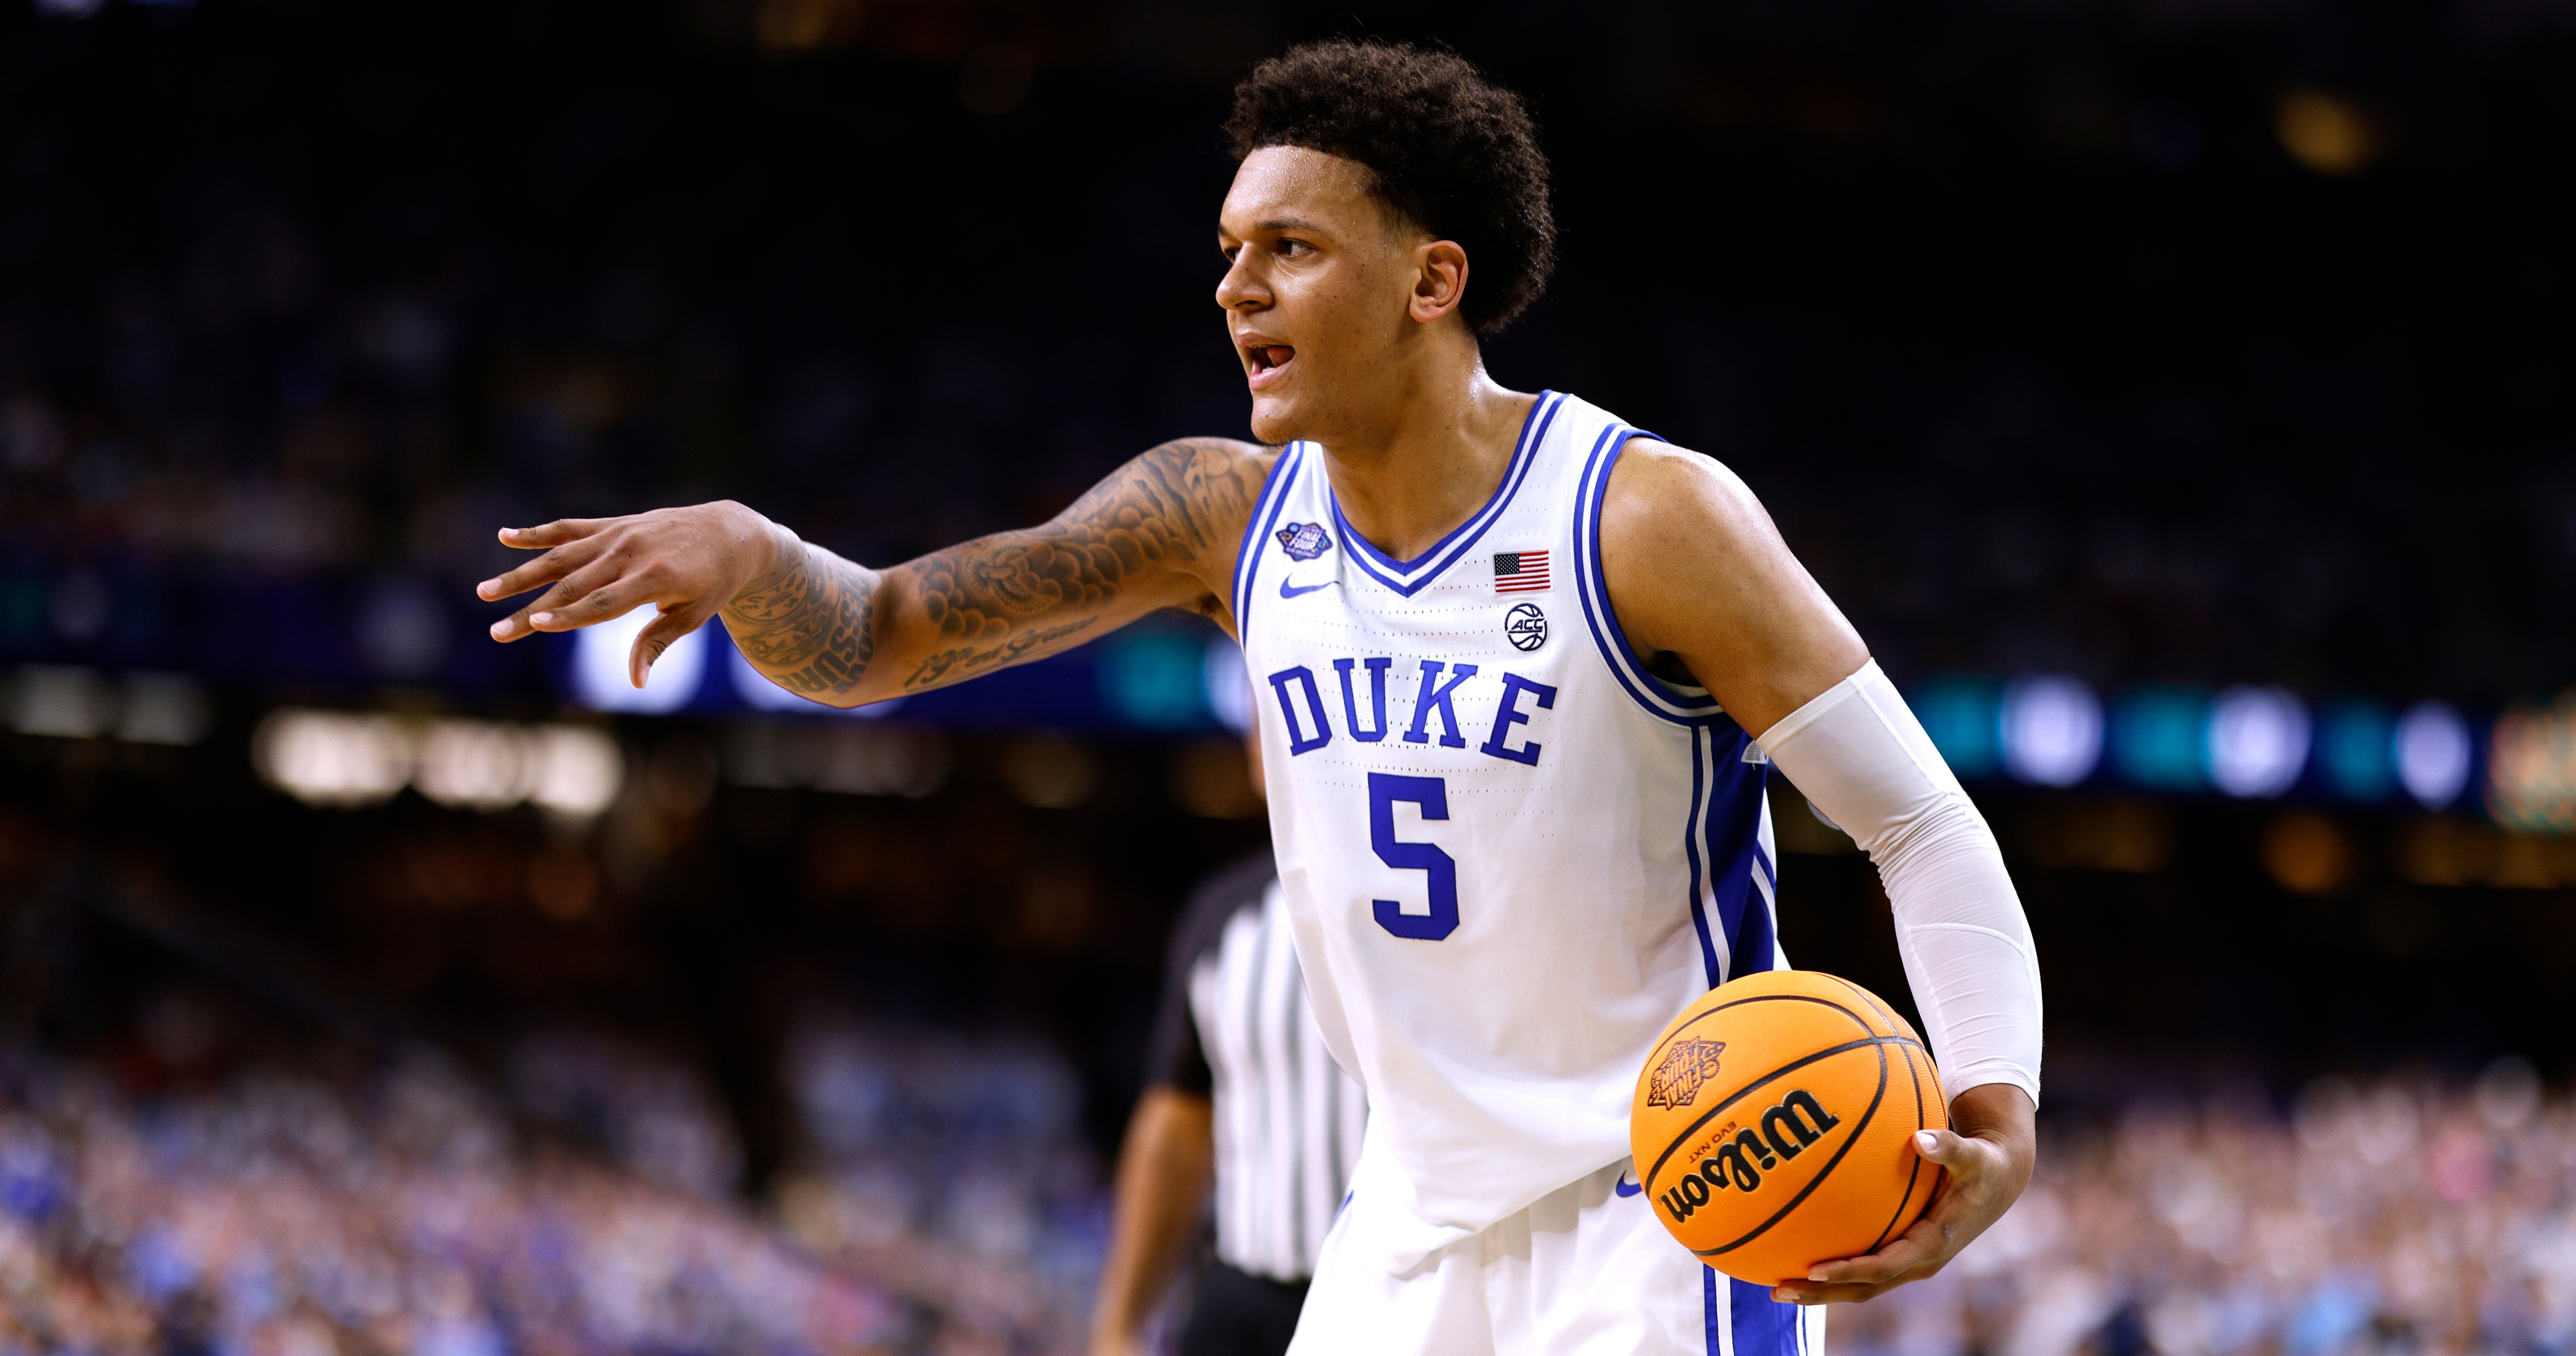 NBA Mock Draft 1.0: Getting to know Paolo Banchero, Chet Holmgren - Page 2